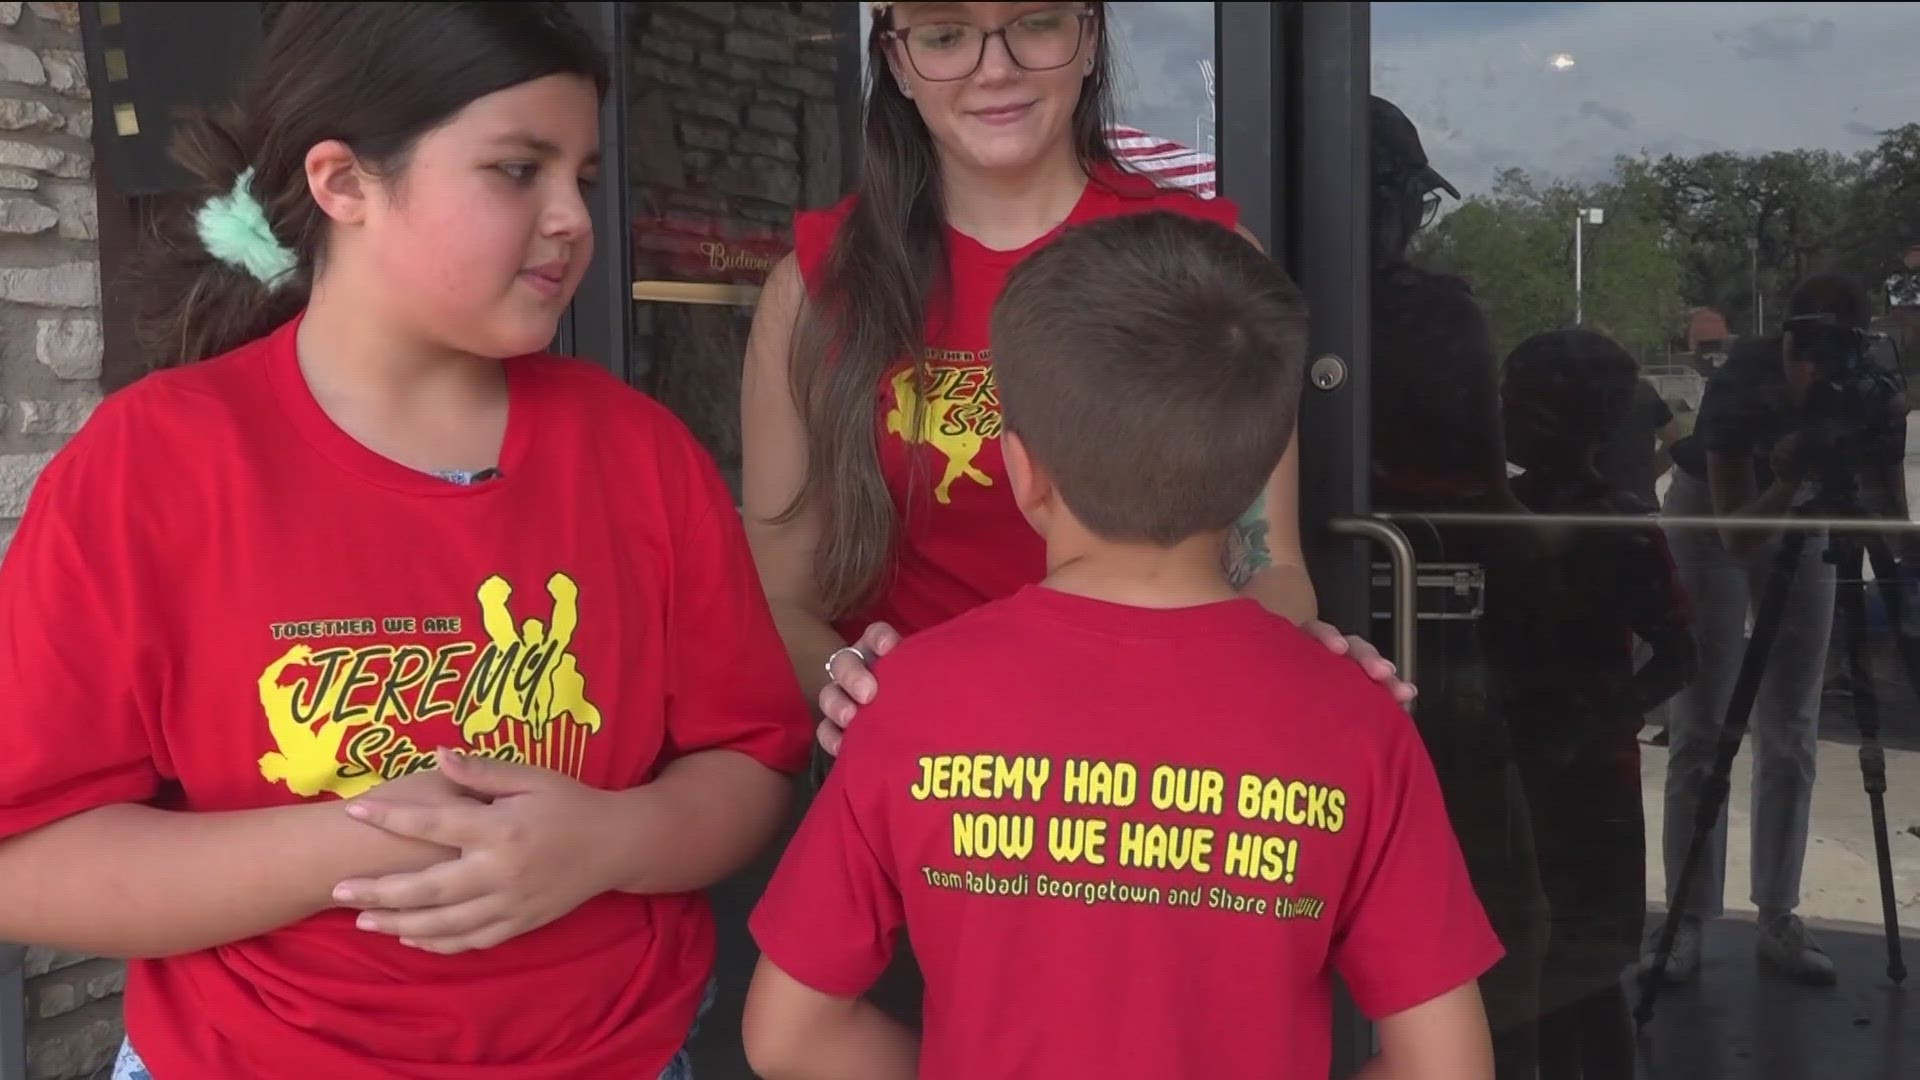 Supporters joined in Round Rock on Sunday to raise money for the family of a boy who was attacked in his home. KVUE spoke with some of Jeremy's friends.